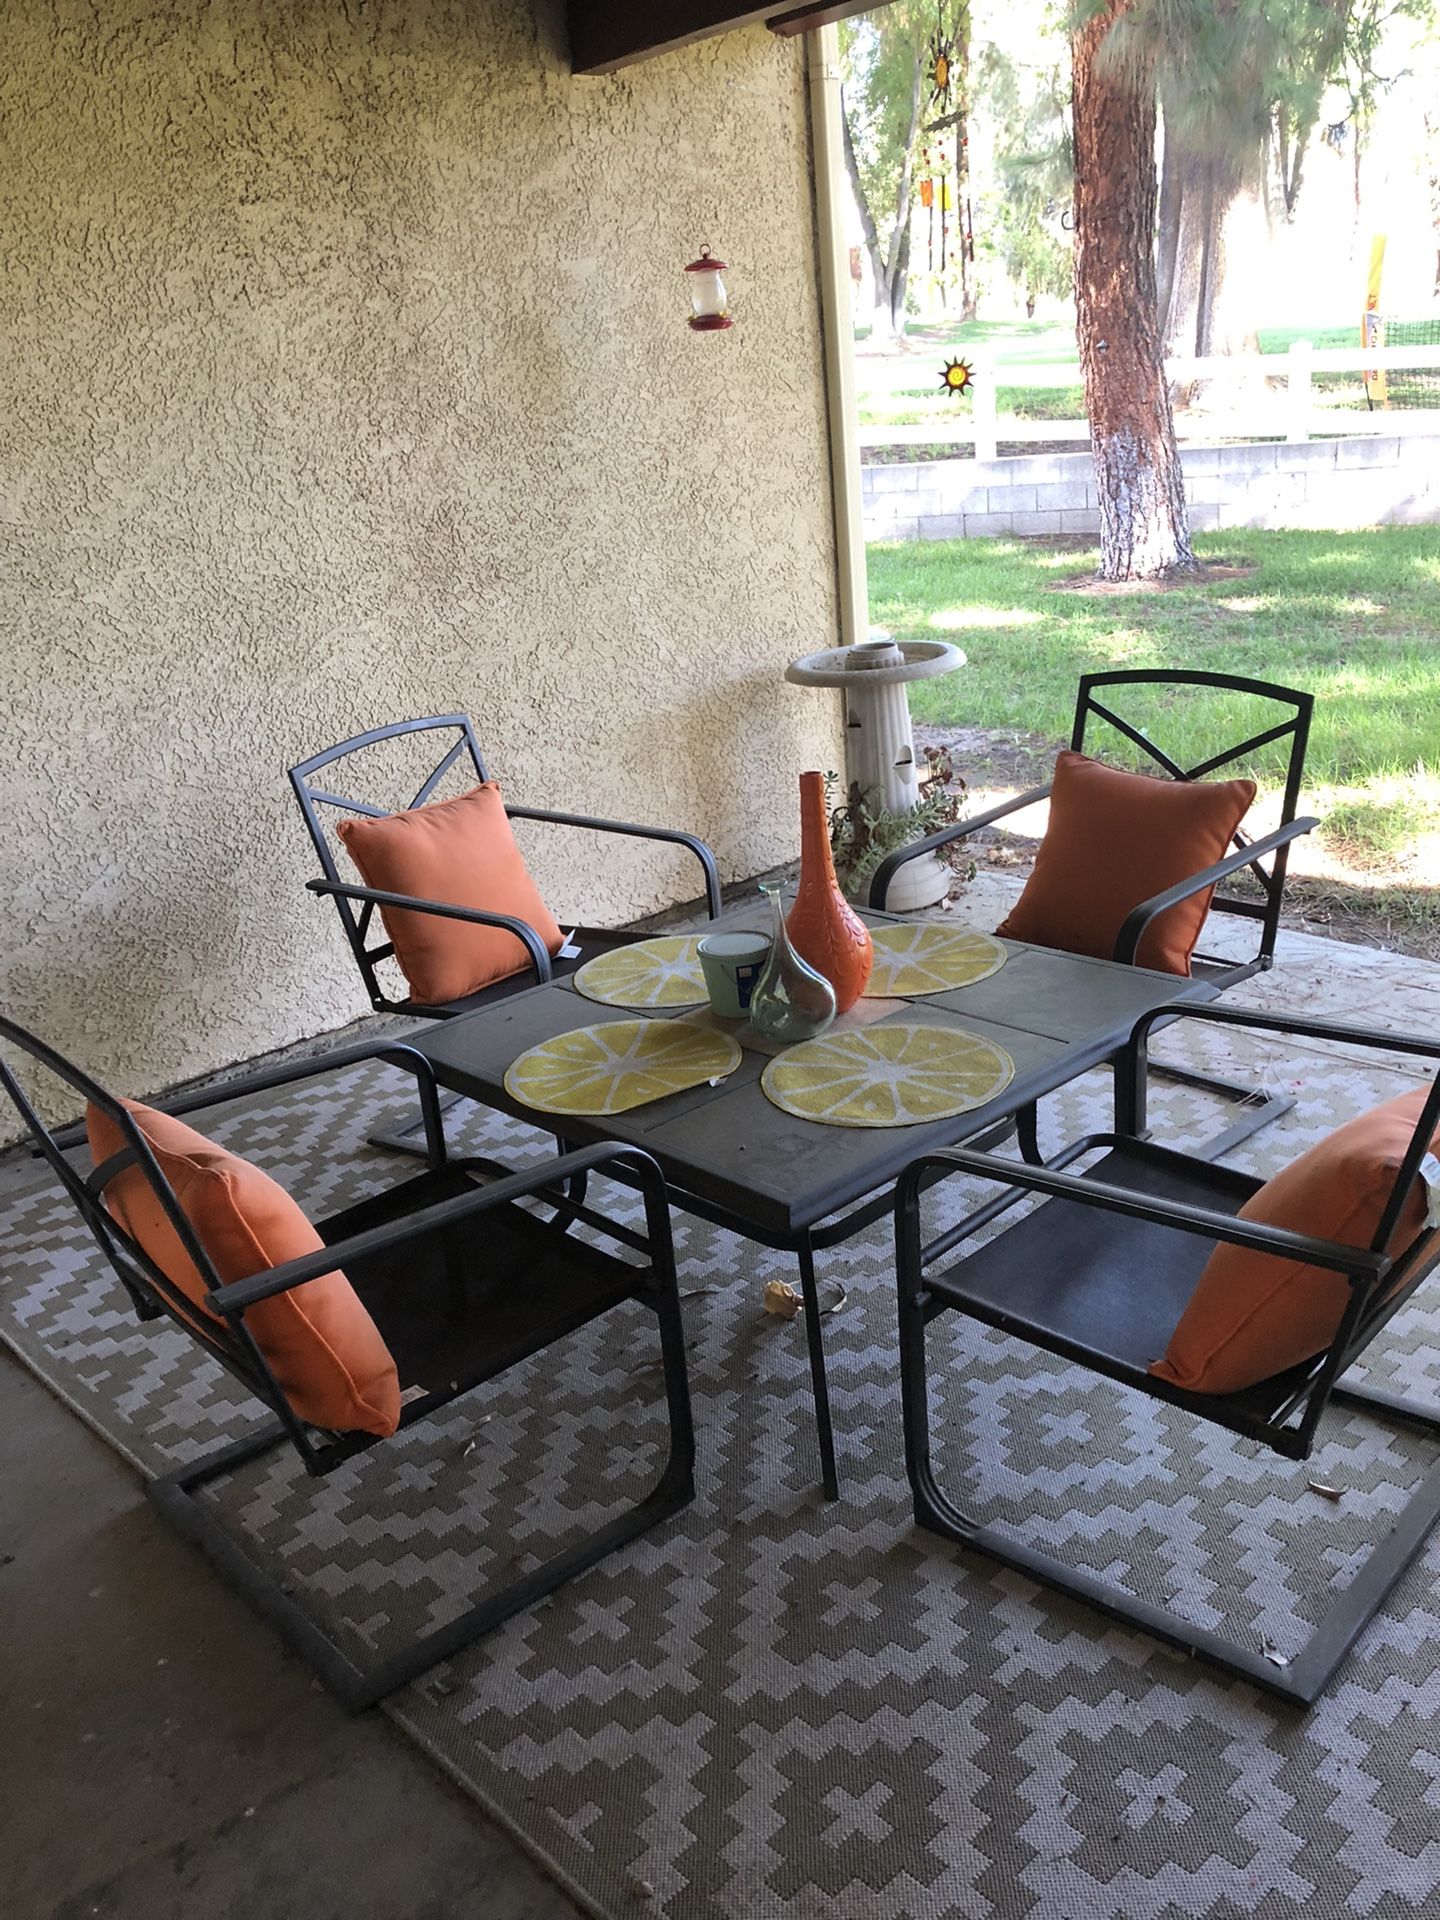 Patio Set With 4 Chairs And 4 Pillows